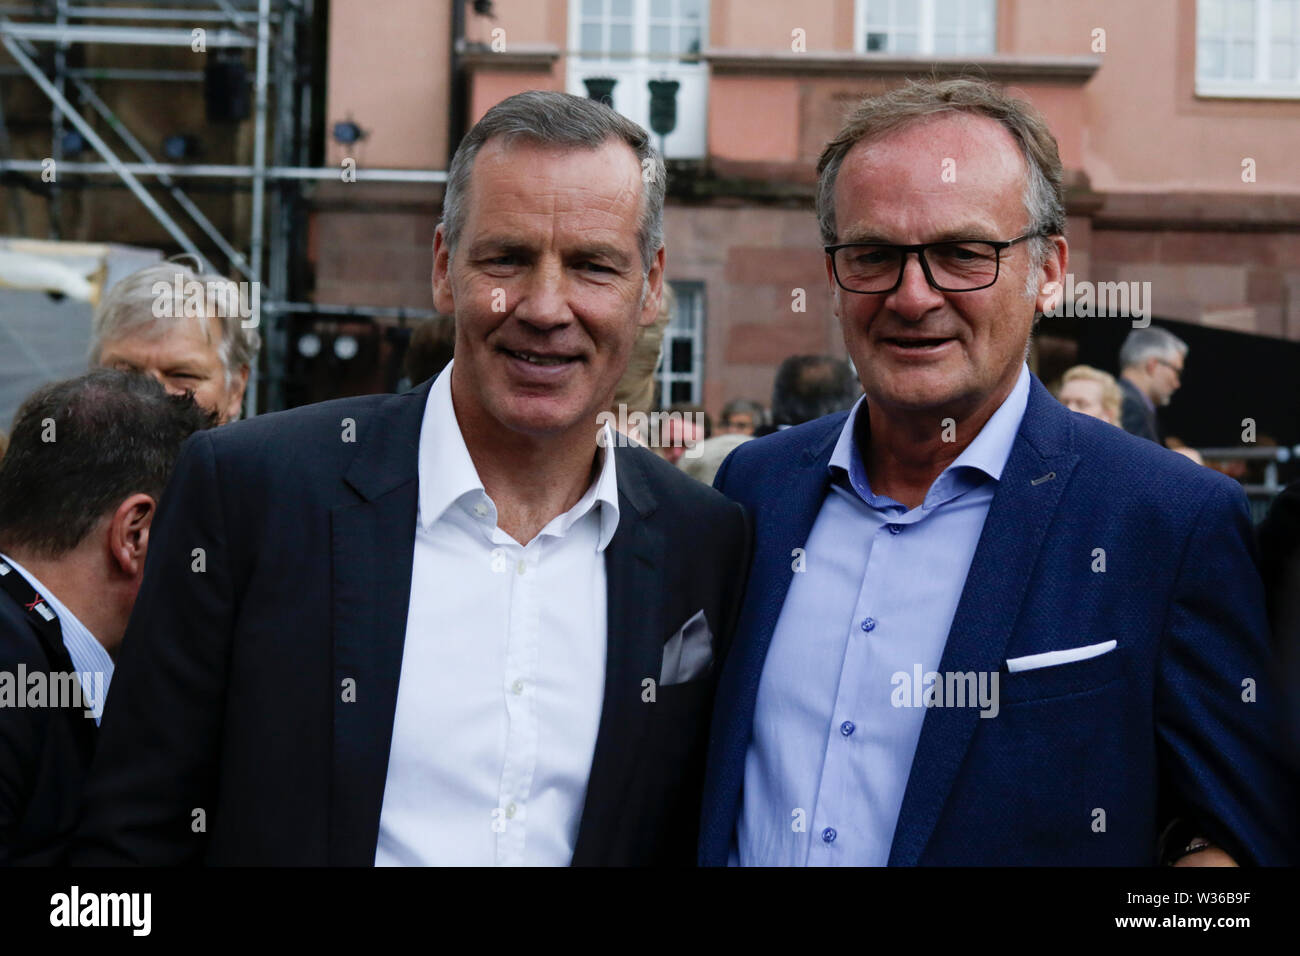 Worms, Germany. 12th July, 2019. The former professional boxer and IBF  light heavyweight World Champion Henry Maske (left) and TV host Frank  Plasberg (right) are pictured before the premiere of the  'Nibelungen-Festspiele'.